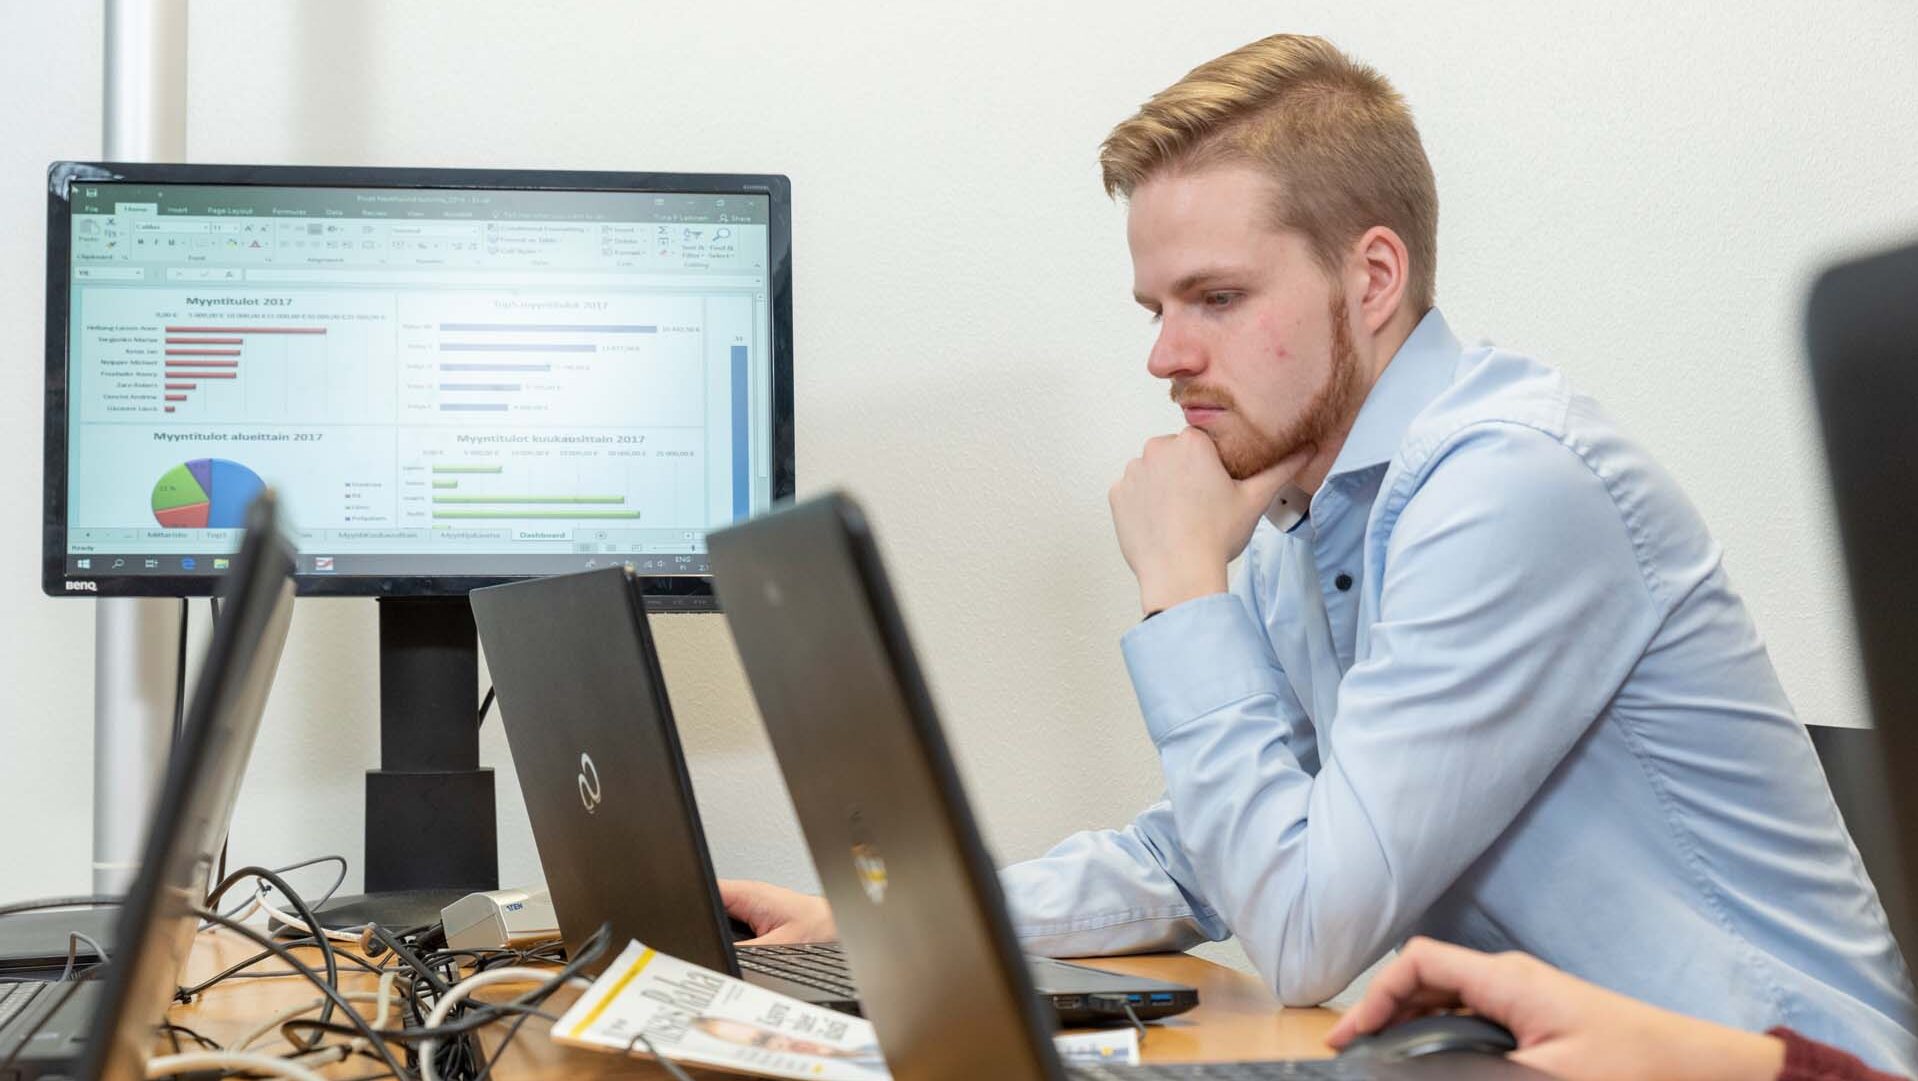 Man sitting in front of a laptop thinking and looking at its screen.